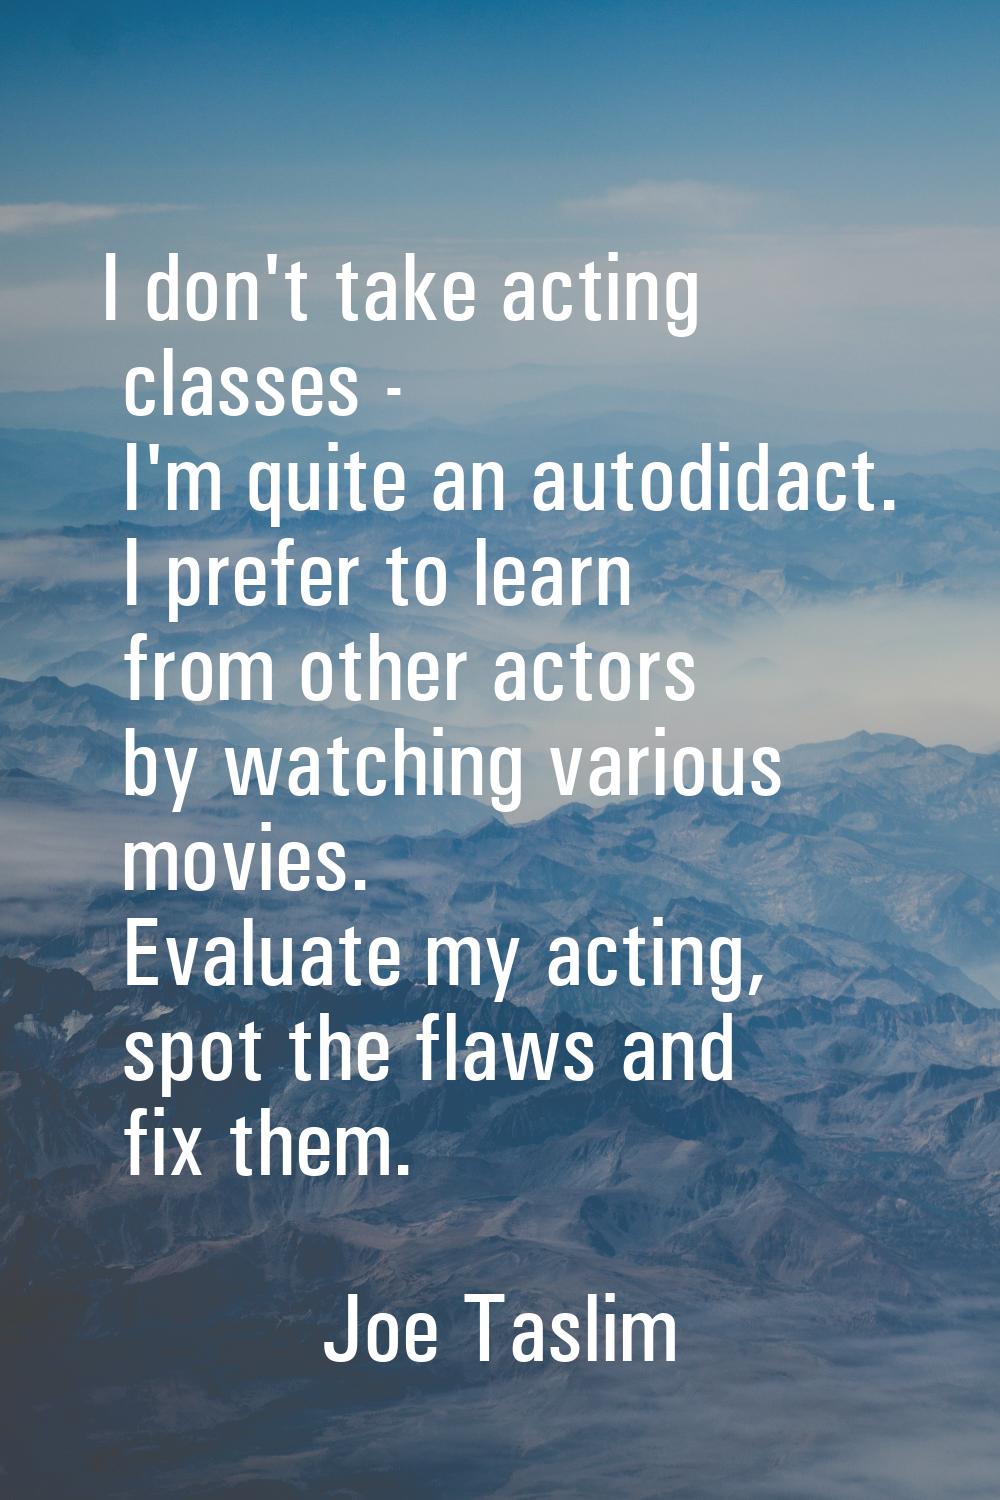 I don't take acting classes - I'm quite an autodidact. I prefer to learn from other actors by watch